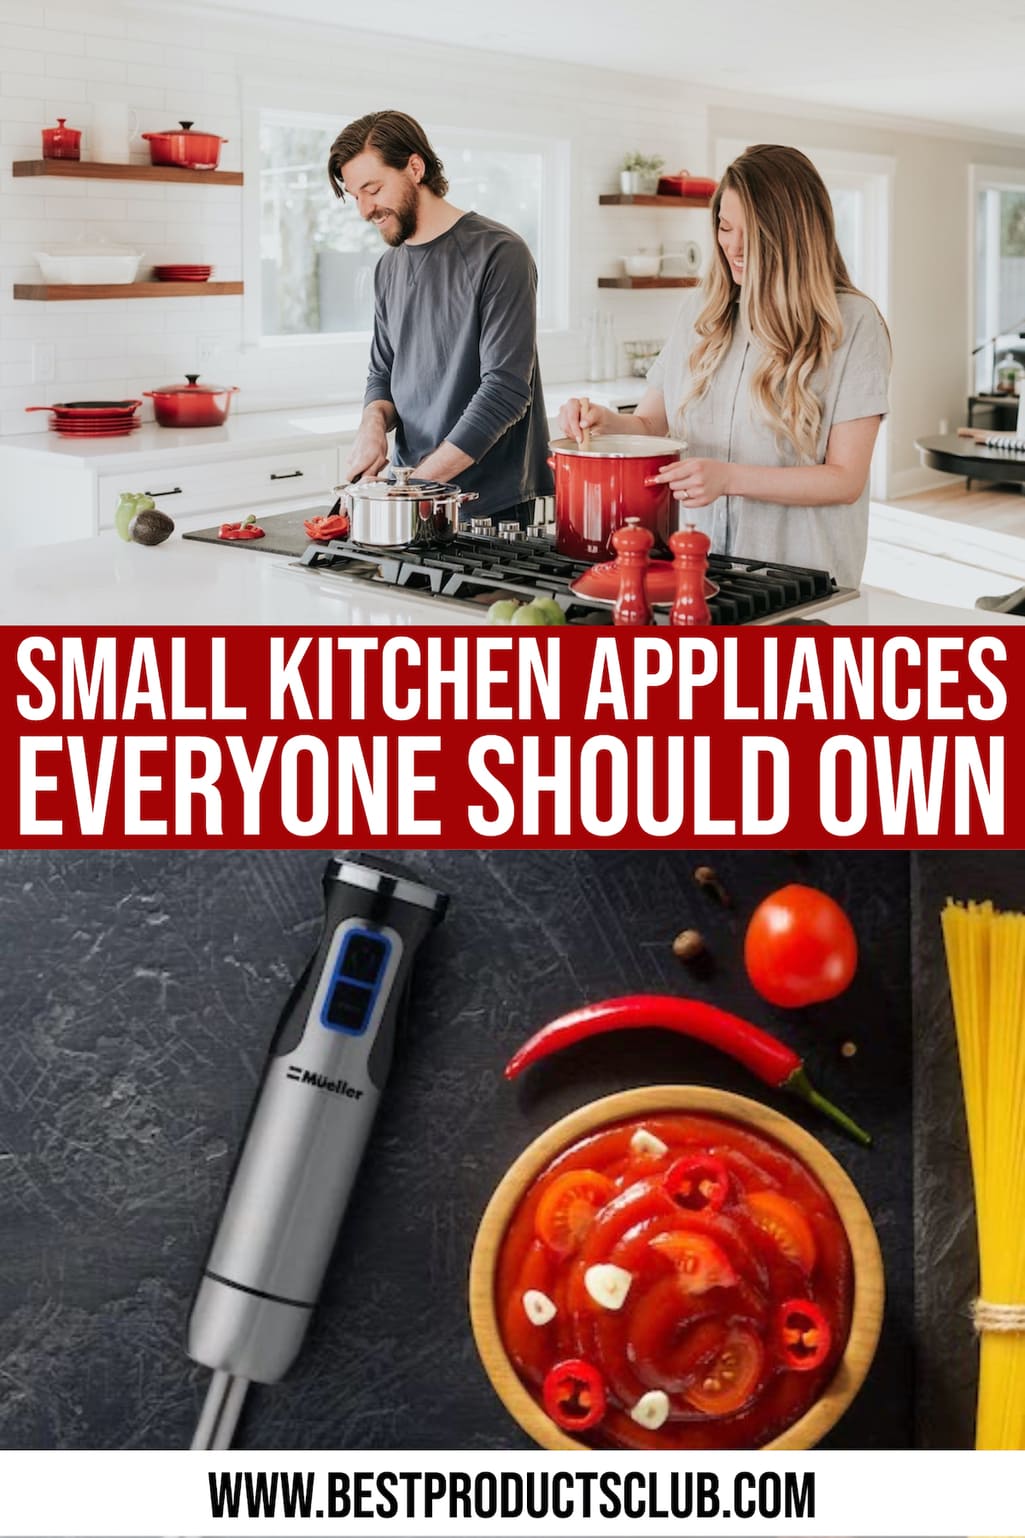 My Favorite Small Kitchen Appliances (with Recipes)